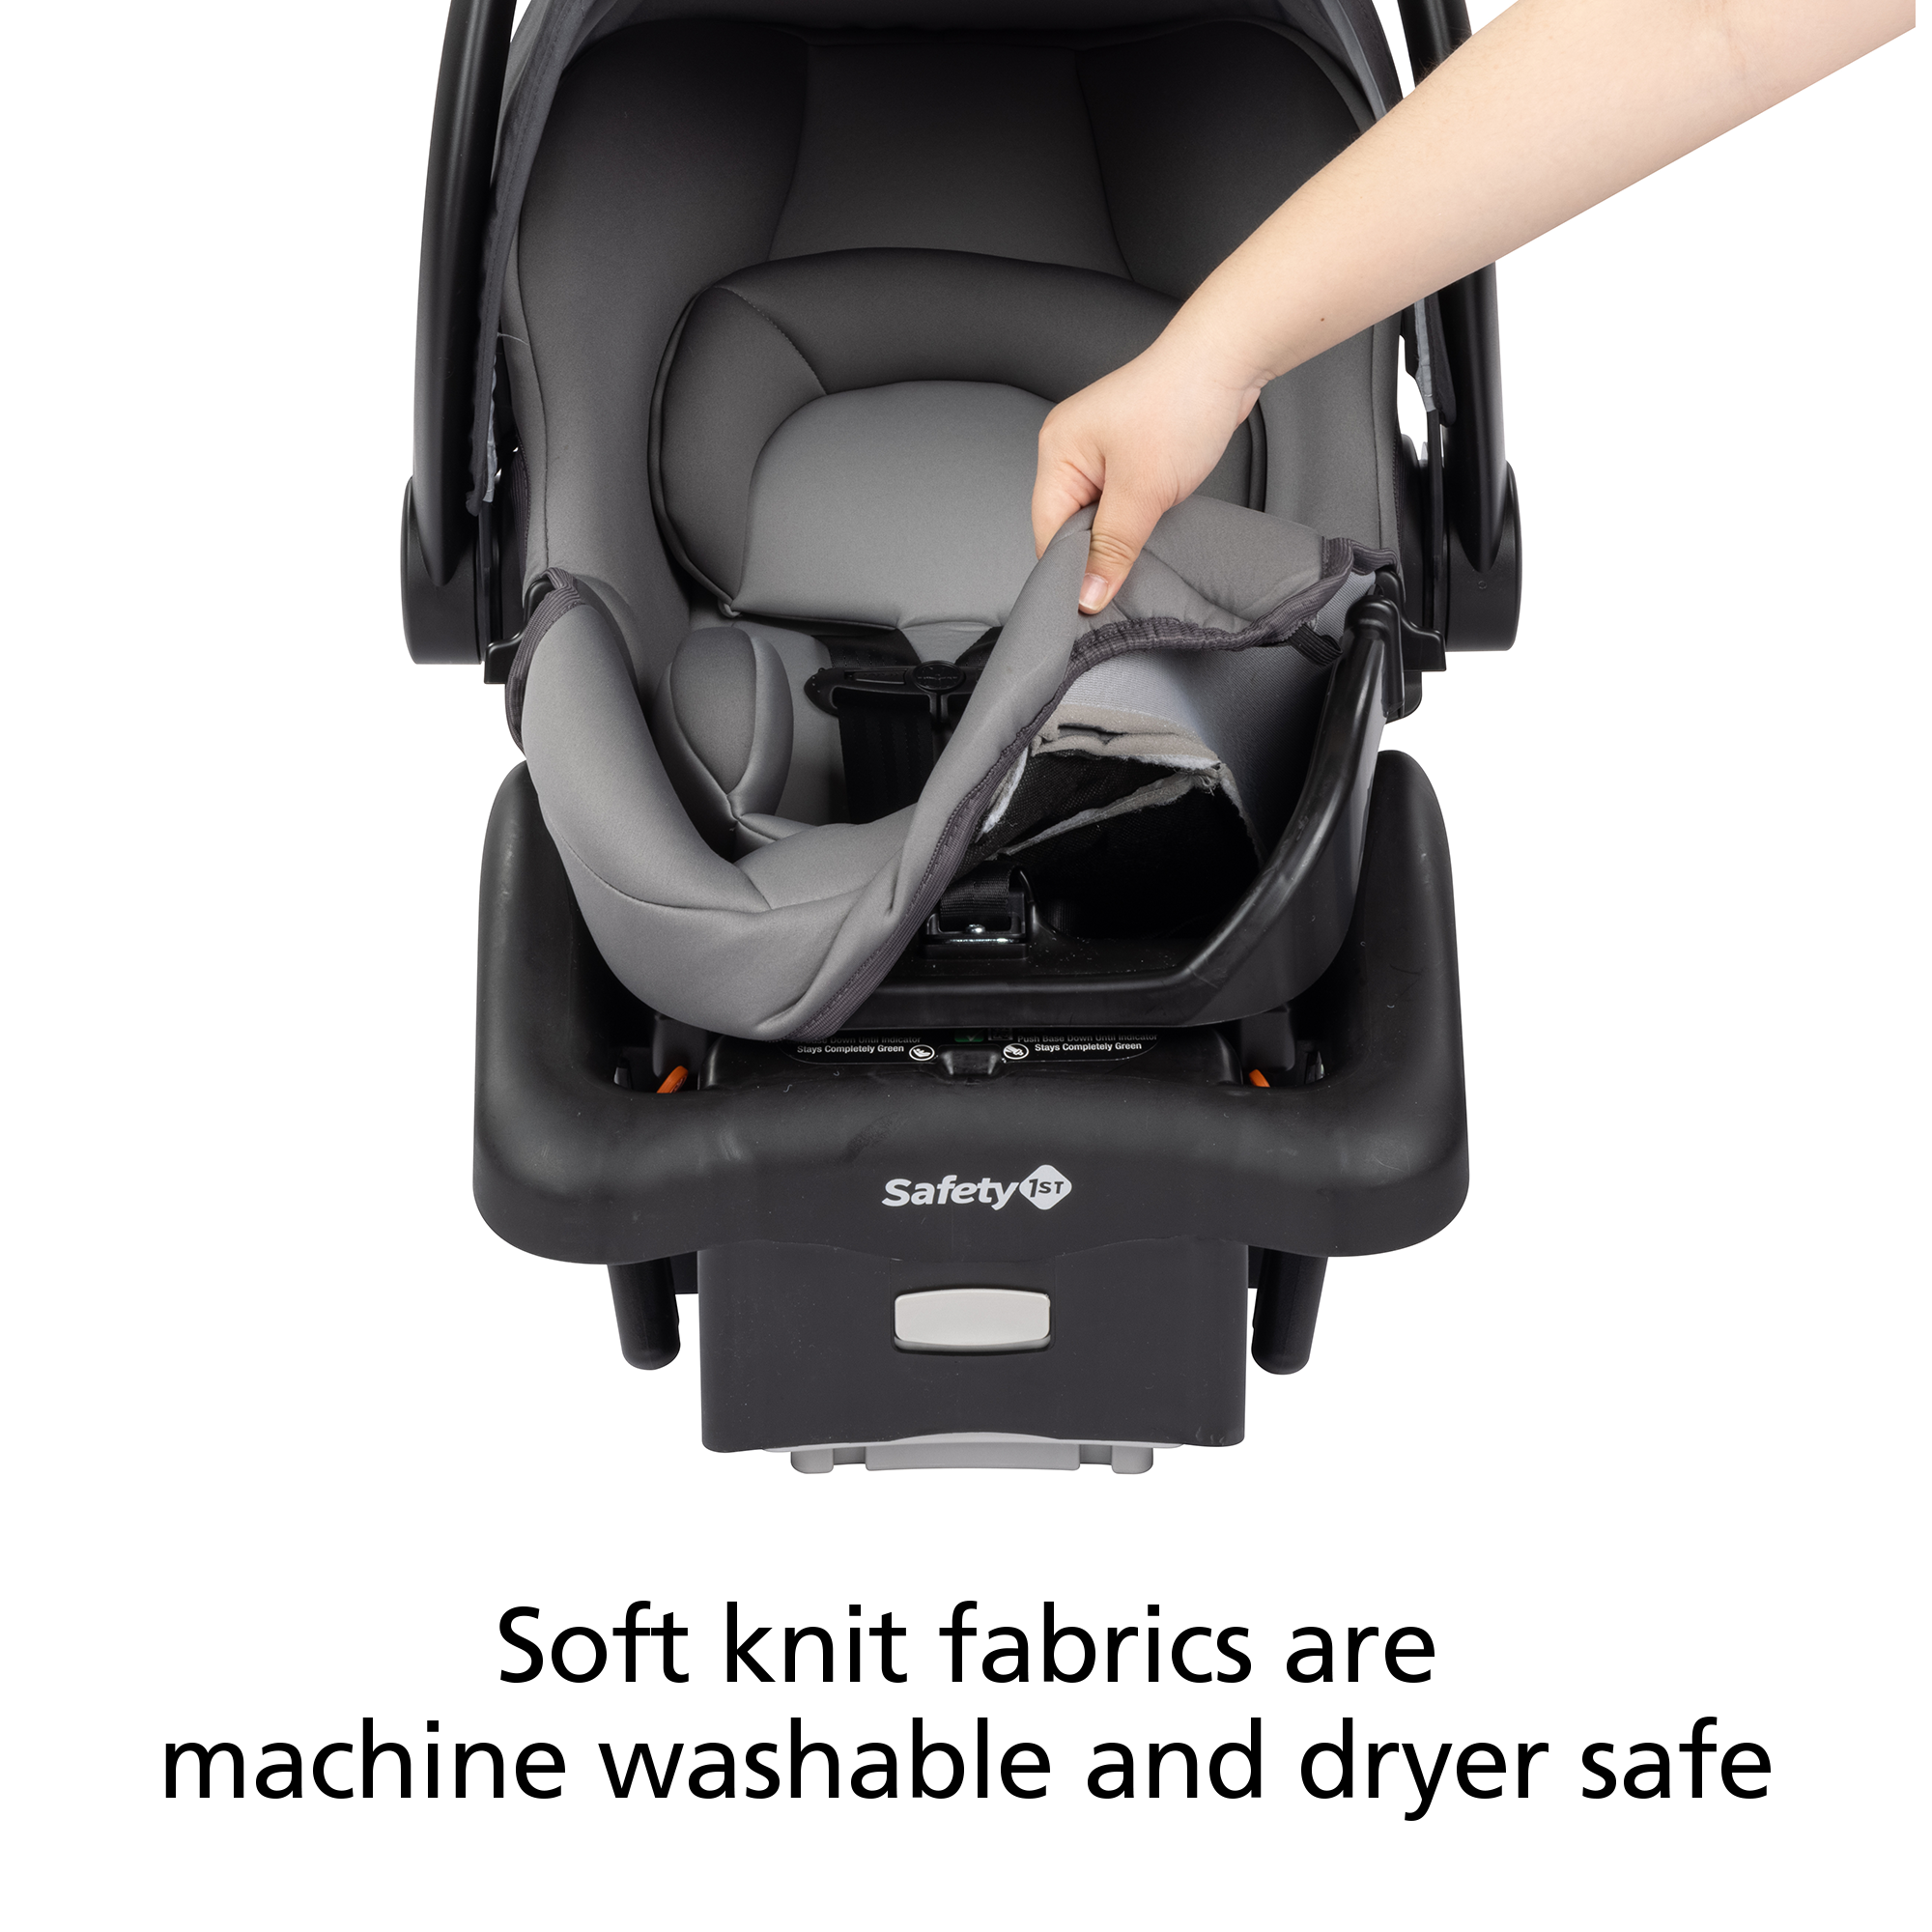 onBoard™35 SecureTech™ Infant Car Seat - soft knit fabrics are machine washable and dryer safe